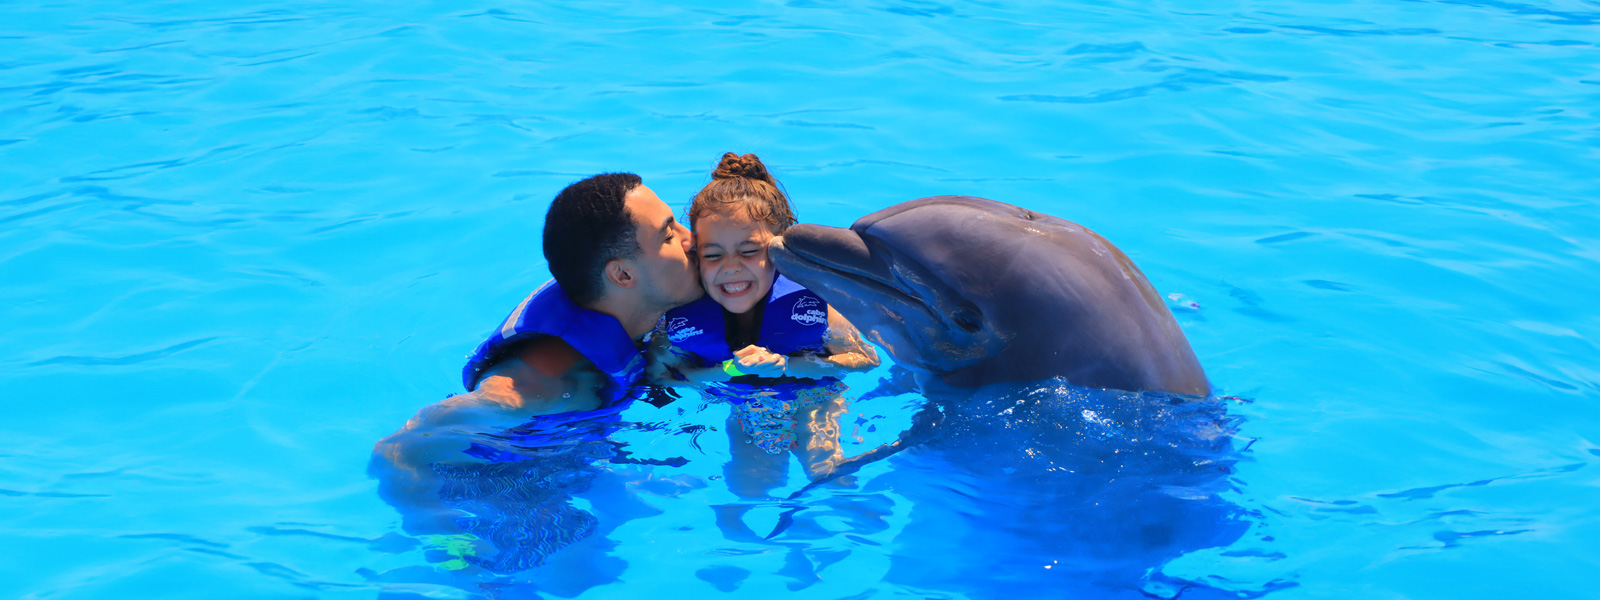 Live a wonderful experience with dolphins in Cabo